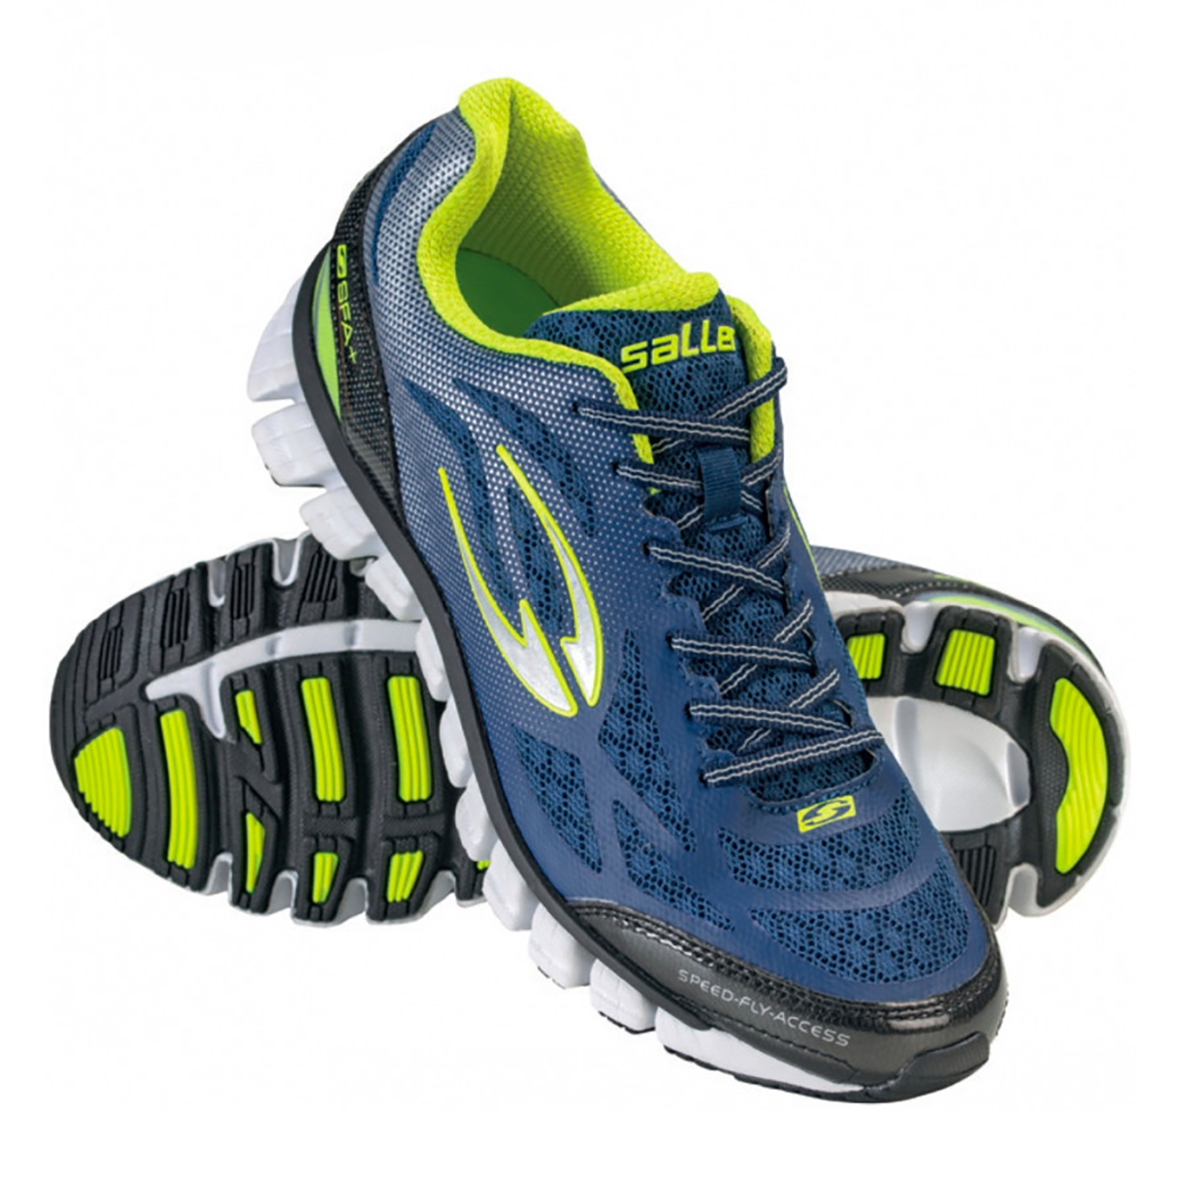 RUNNING SHOES SPORT-SALLER  SFA+TWO, MARINE-LIME-WHITE.